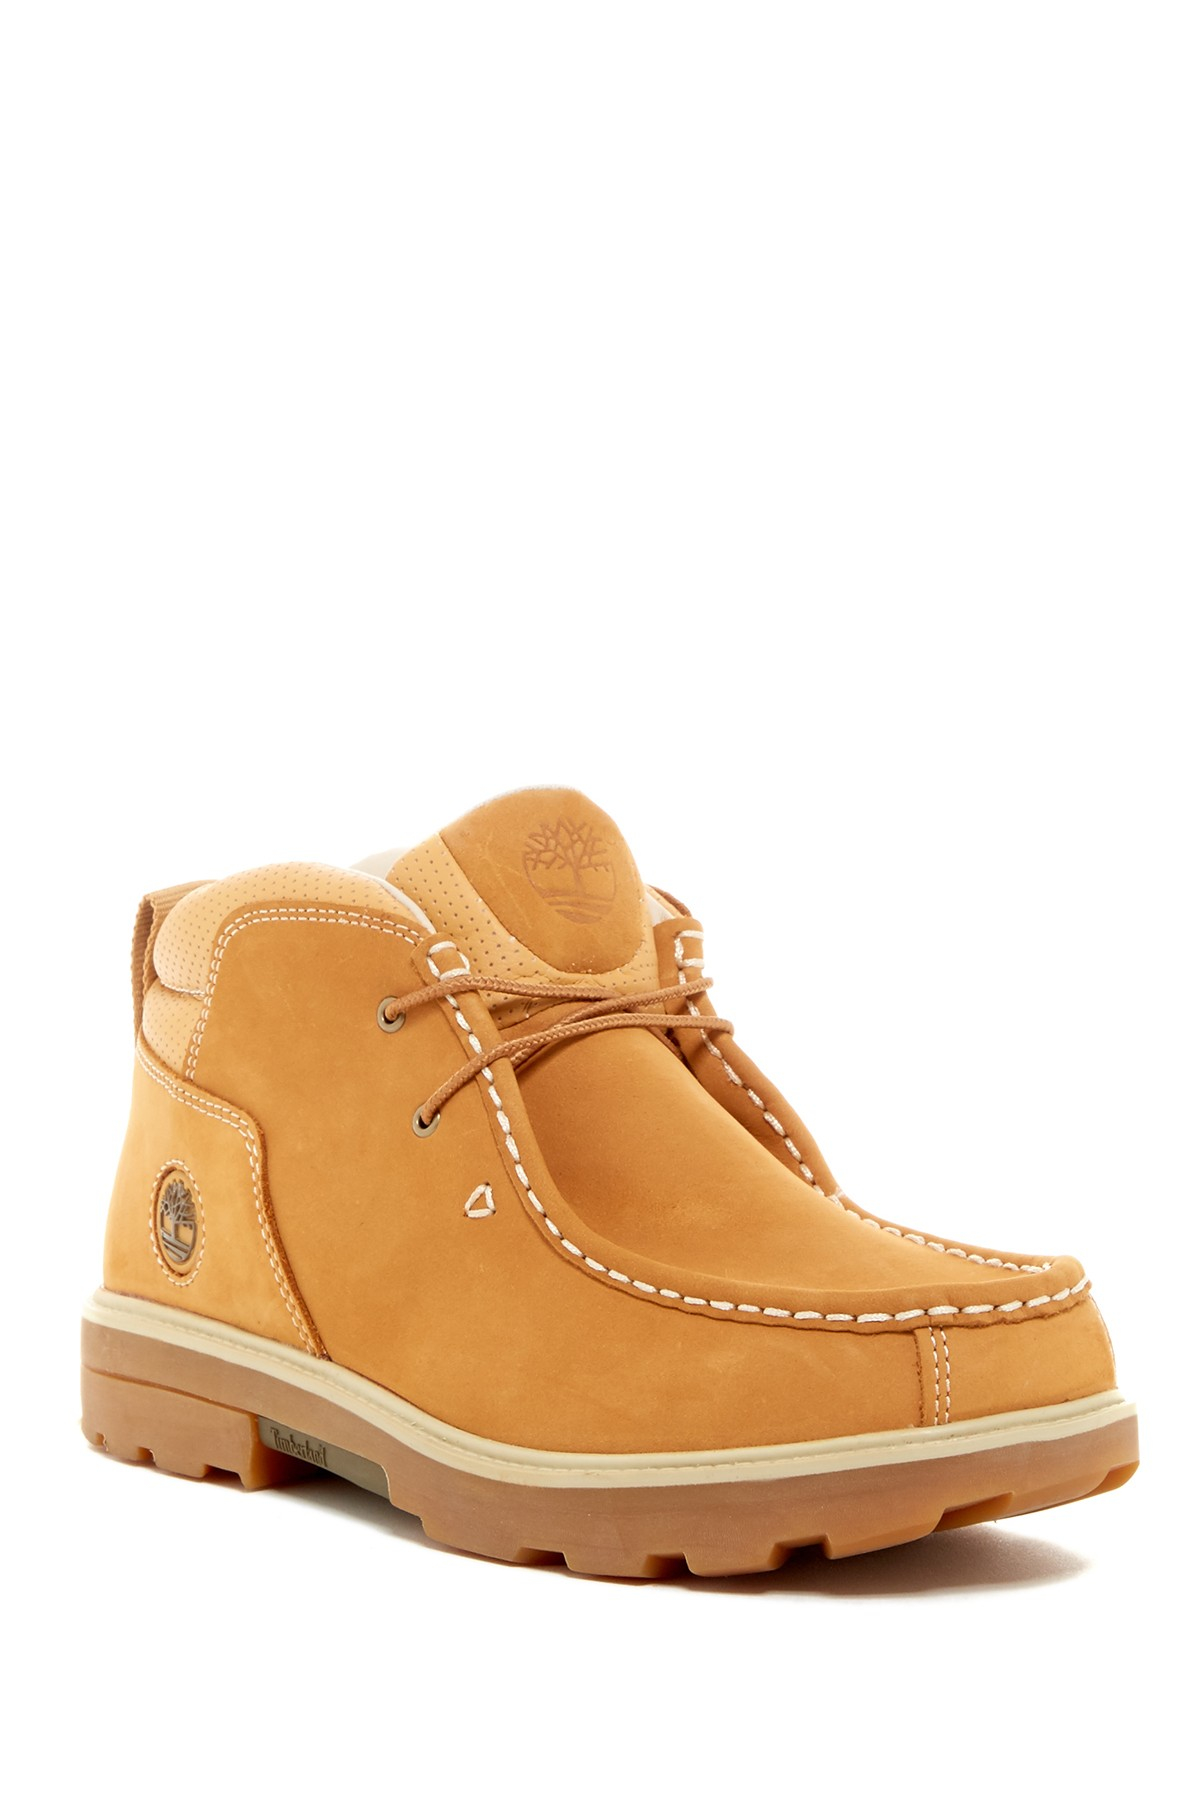 Timberland Leather Rugged Street 2 Chukka Boot in Yellow (Brown) | Lyst